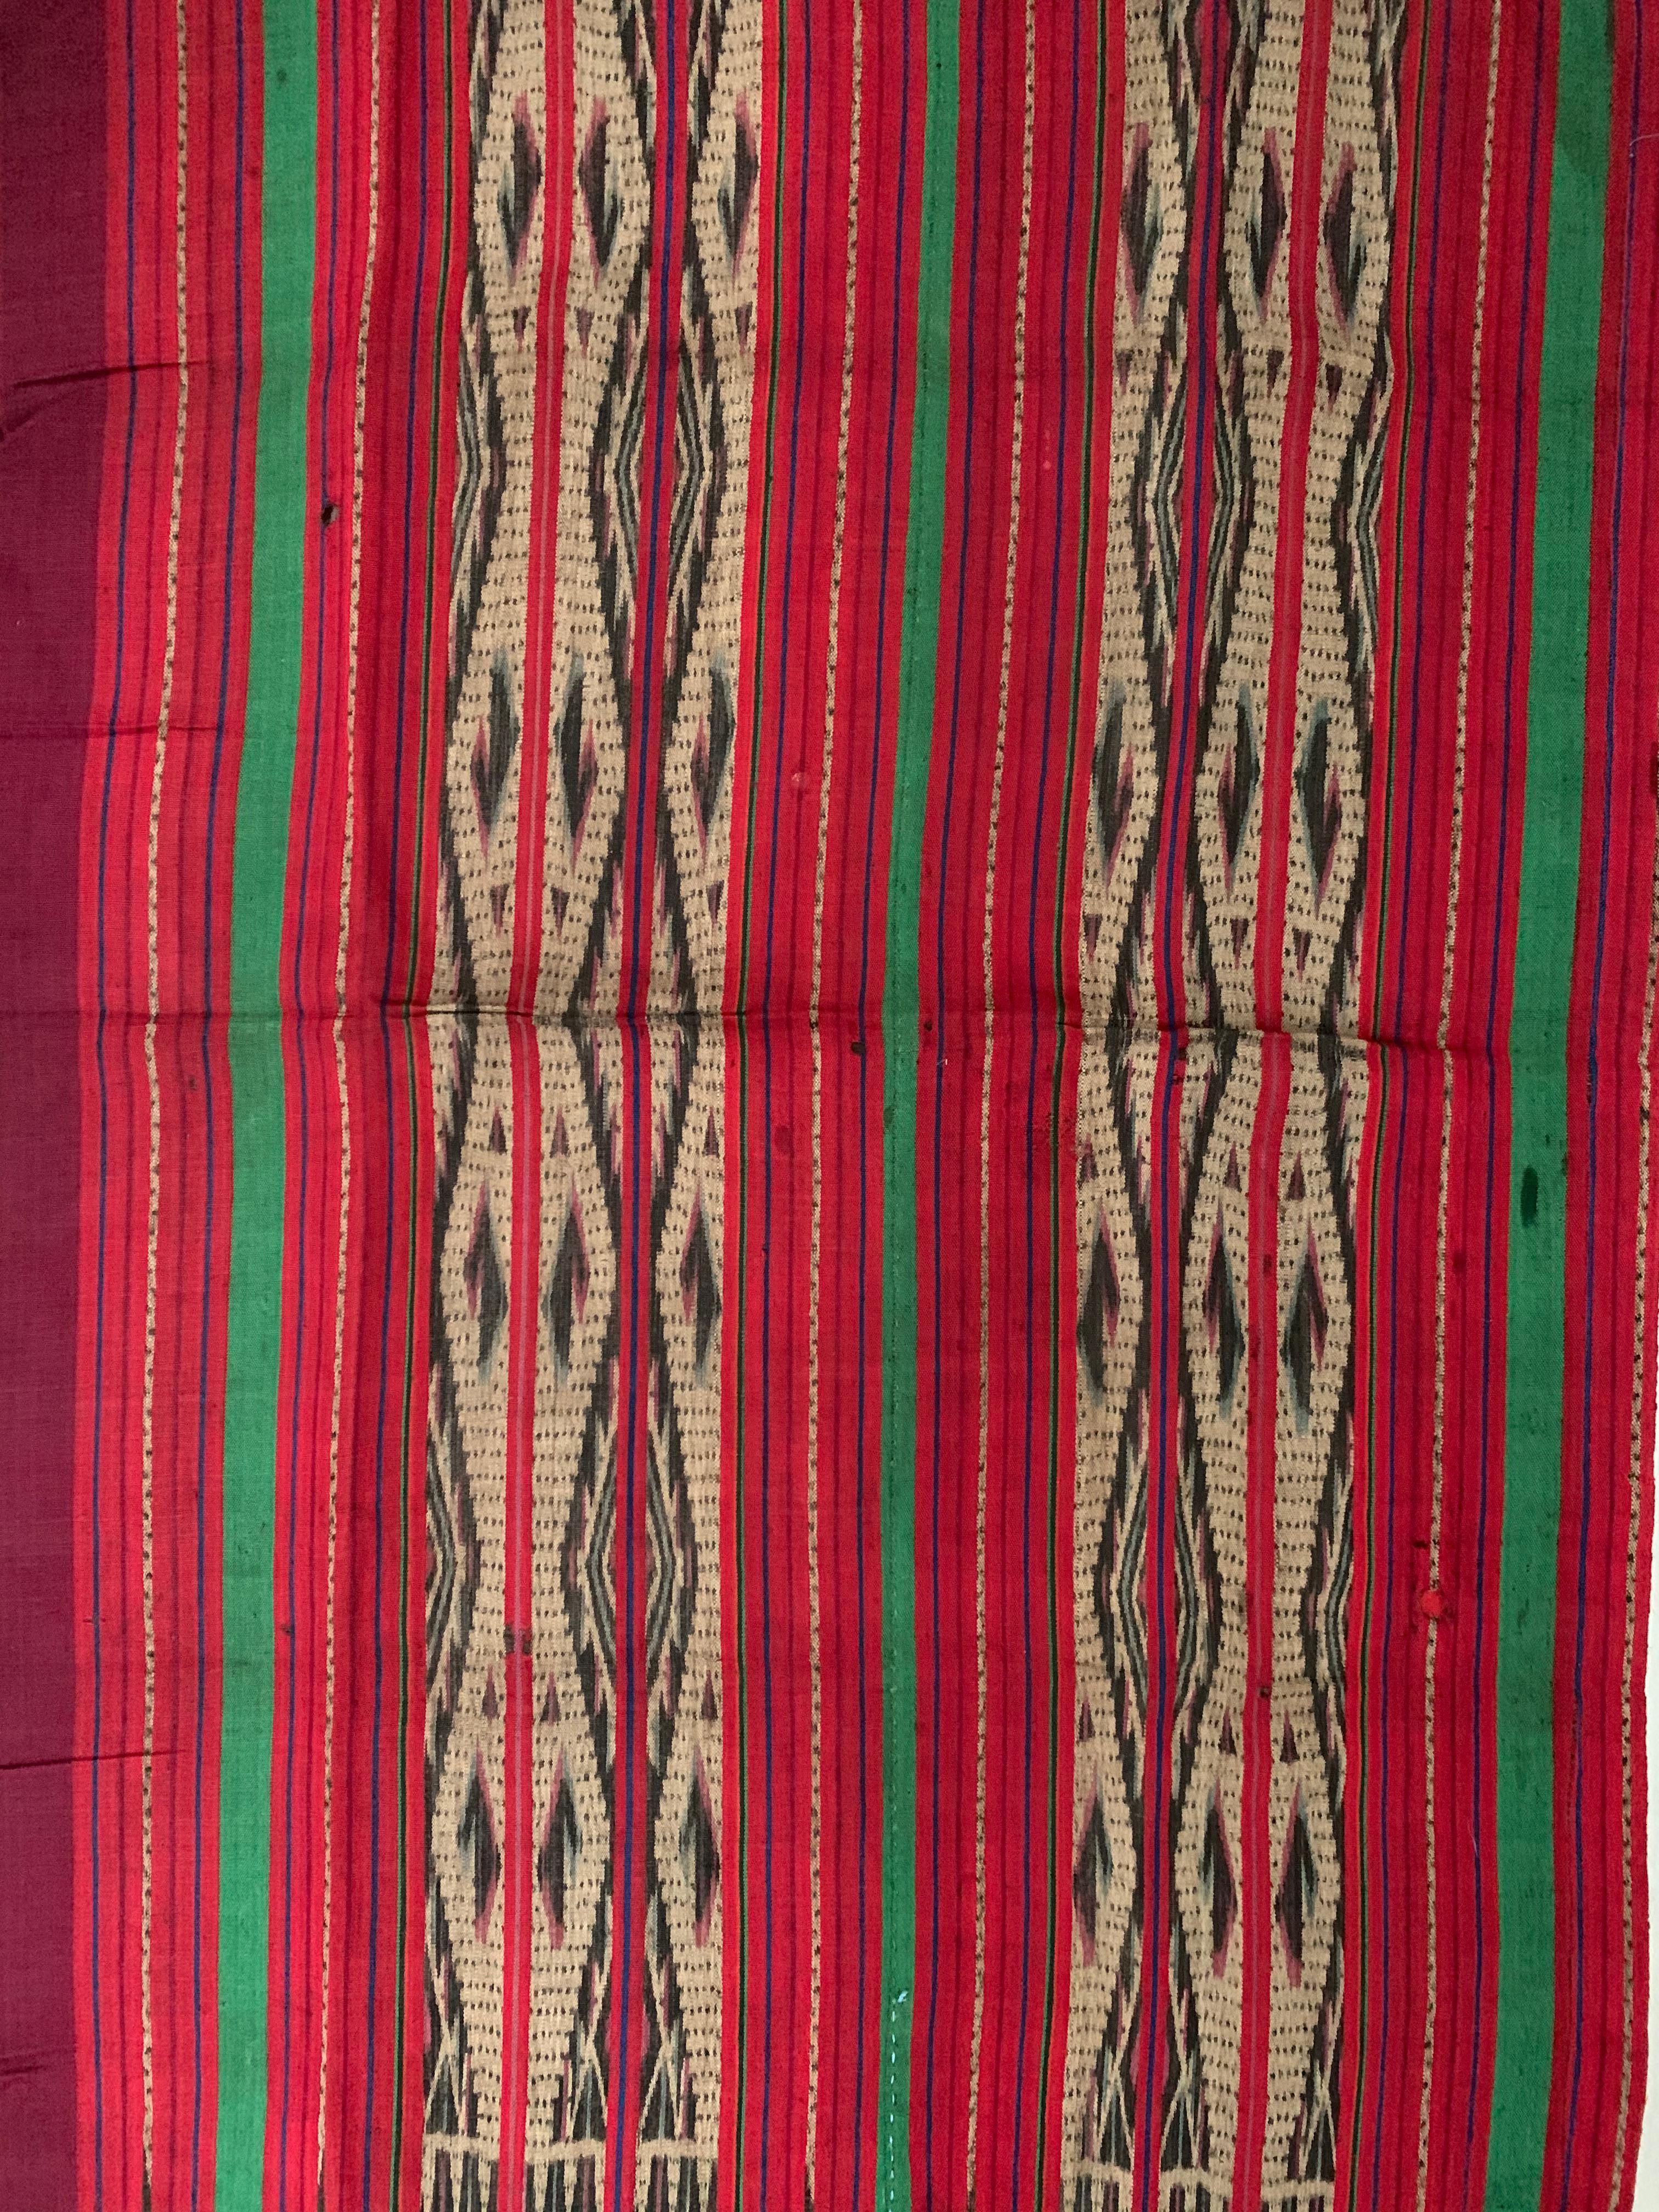 This Ikat textile originates from the Island of Kalimantan, Indonesia. It is hand-woven using naturally dyed yarns via a method passed on through generations amid the Dayak Tribes scattered throughout the island. It features a stunning red, green &